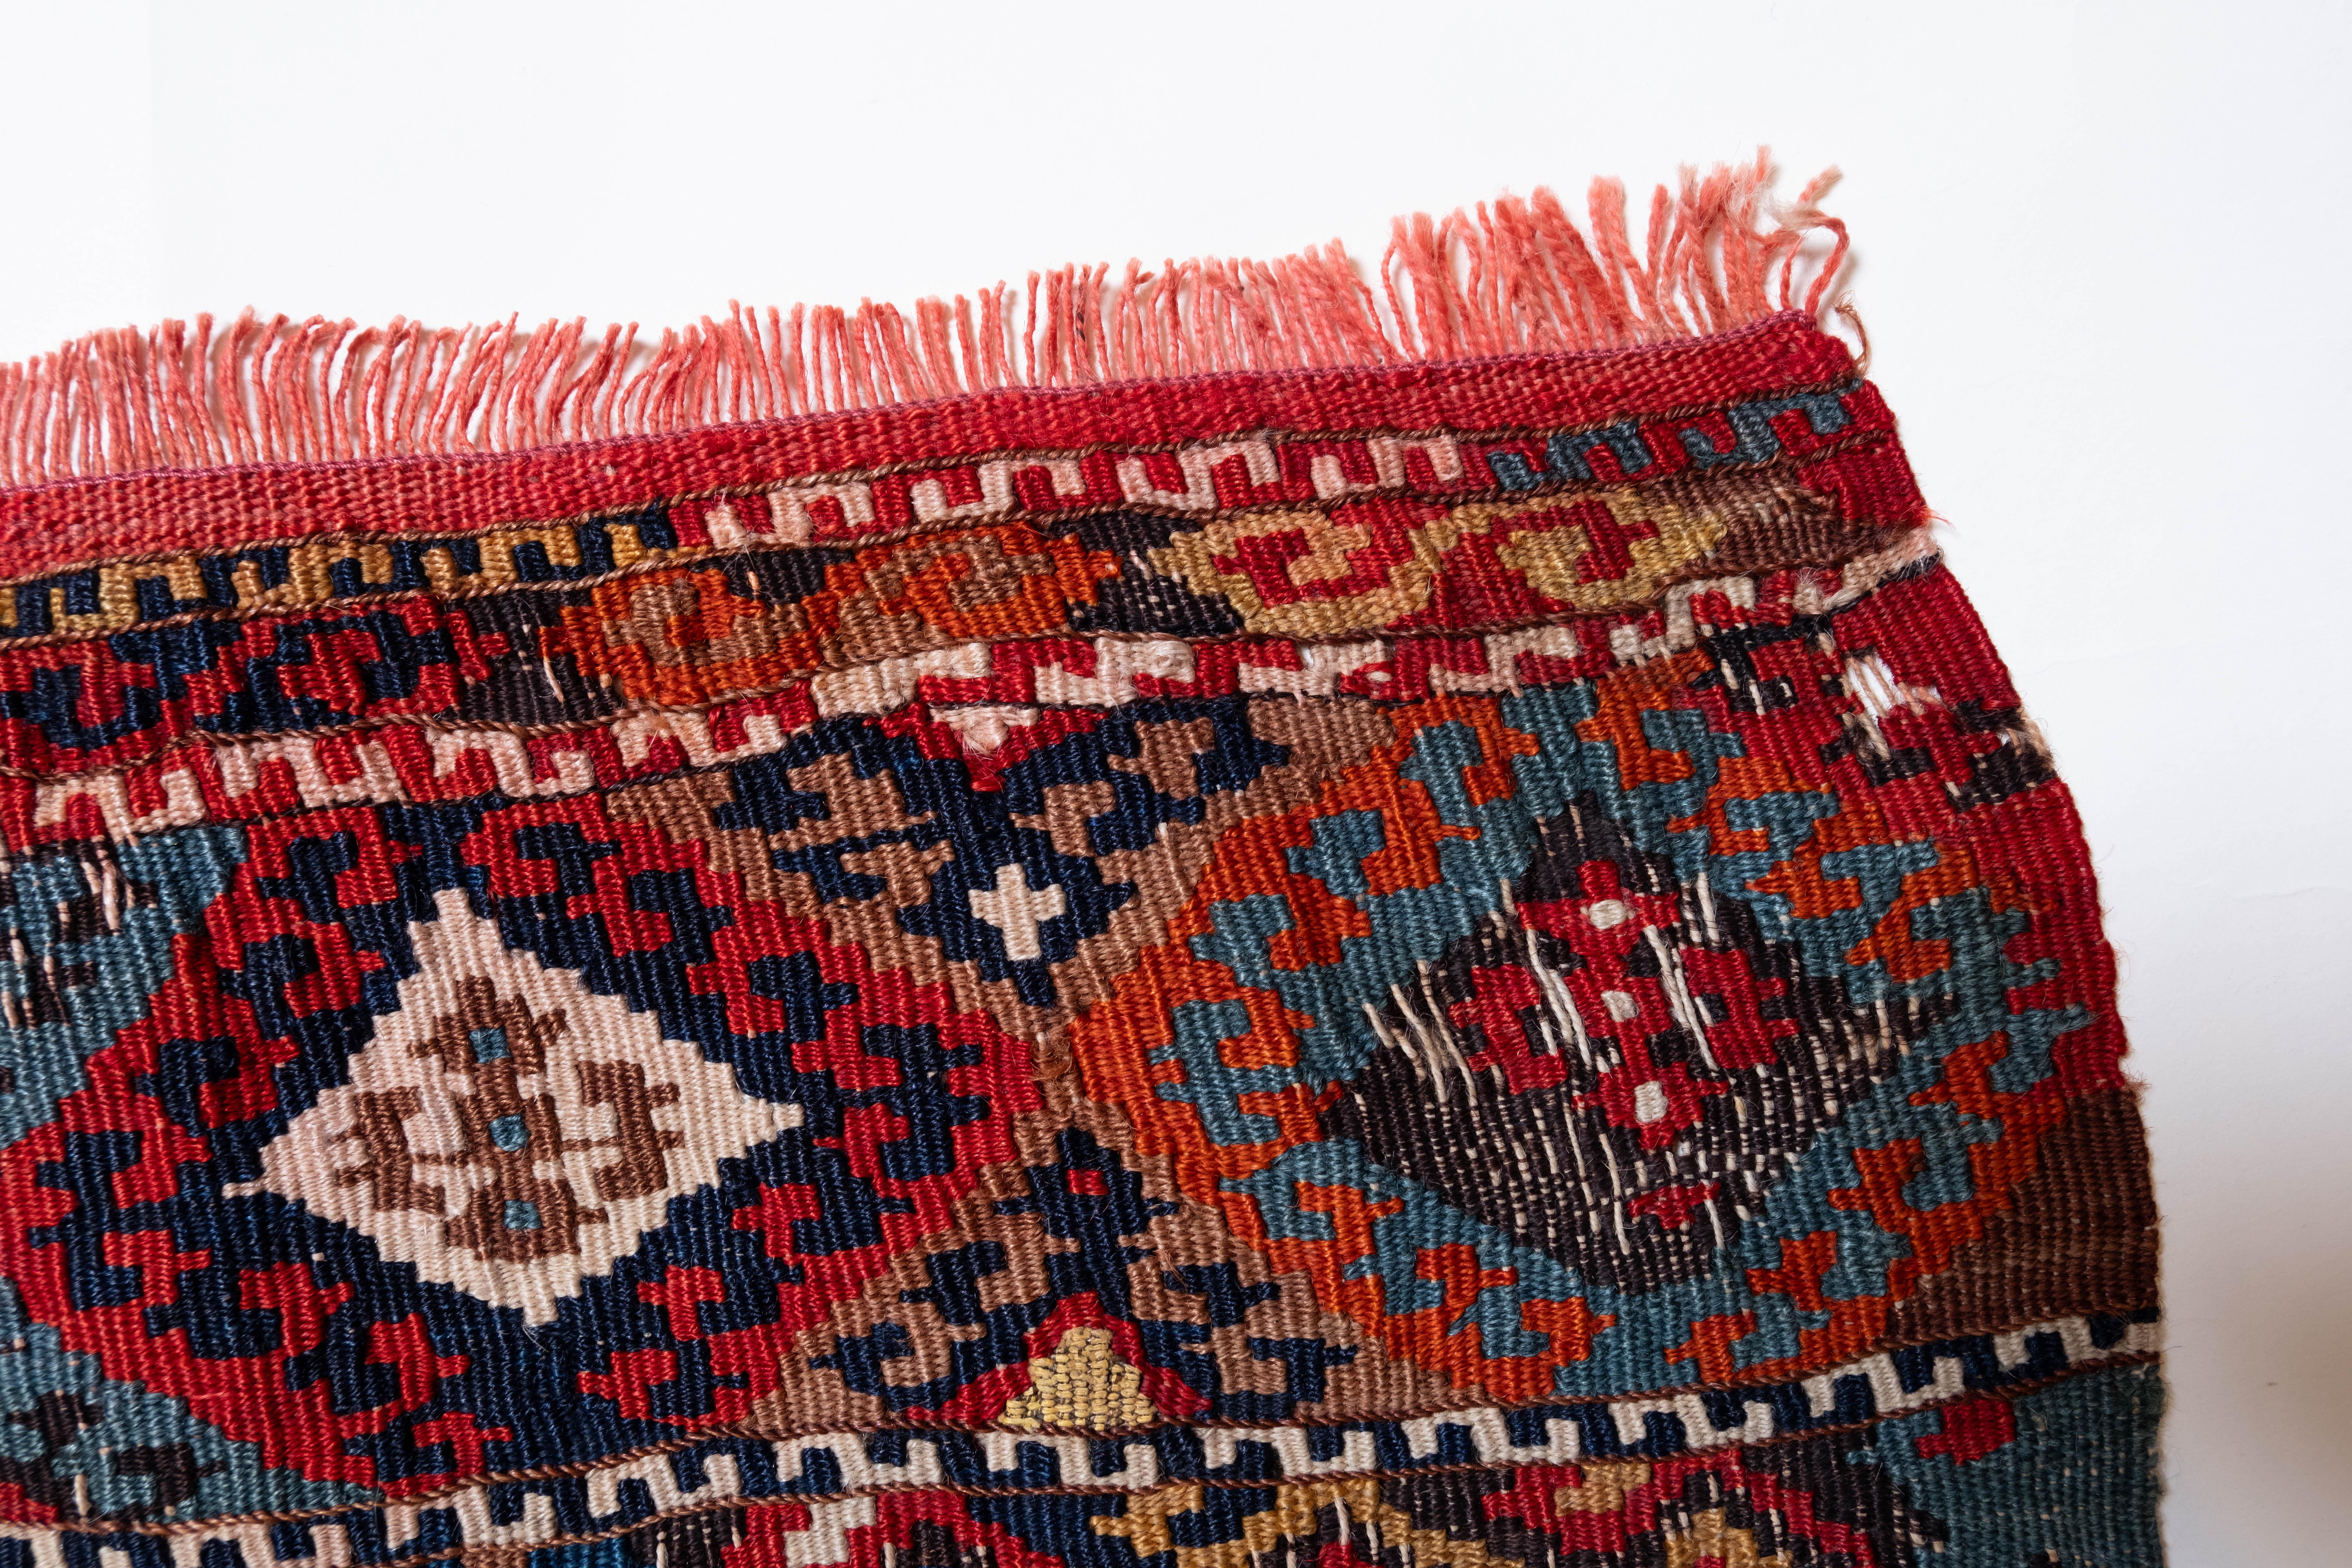 This is Eastern Anatolian Antique Heibe Heybe Kilim from the Malatya region with metallic threads and a rare, beautiful color composition.

This highly collectible antique kilim has wonderful special colors and textures that are typical of an old